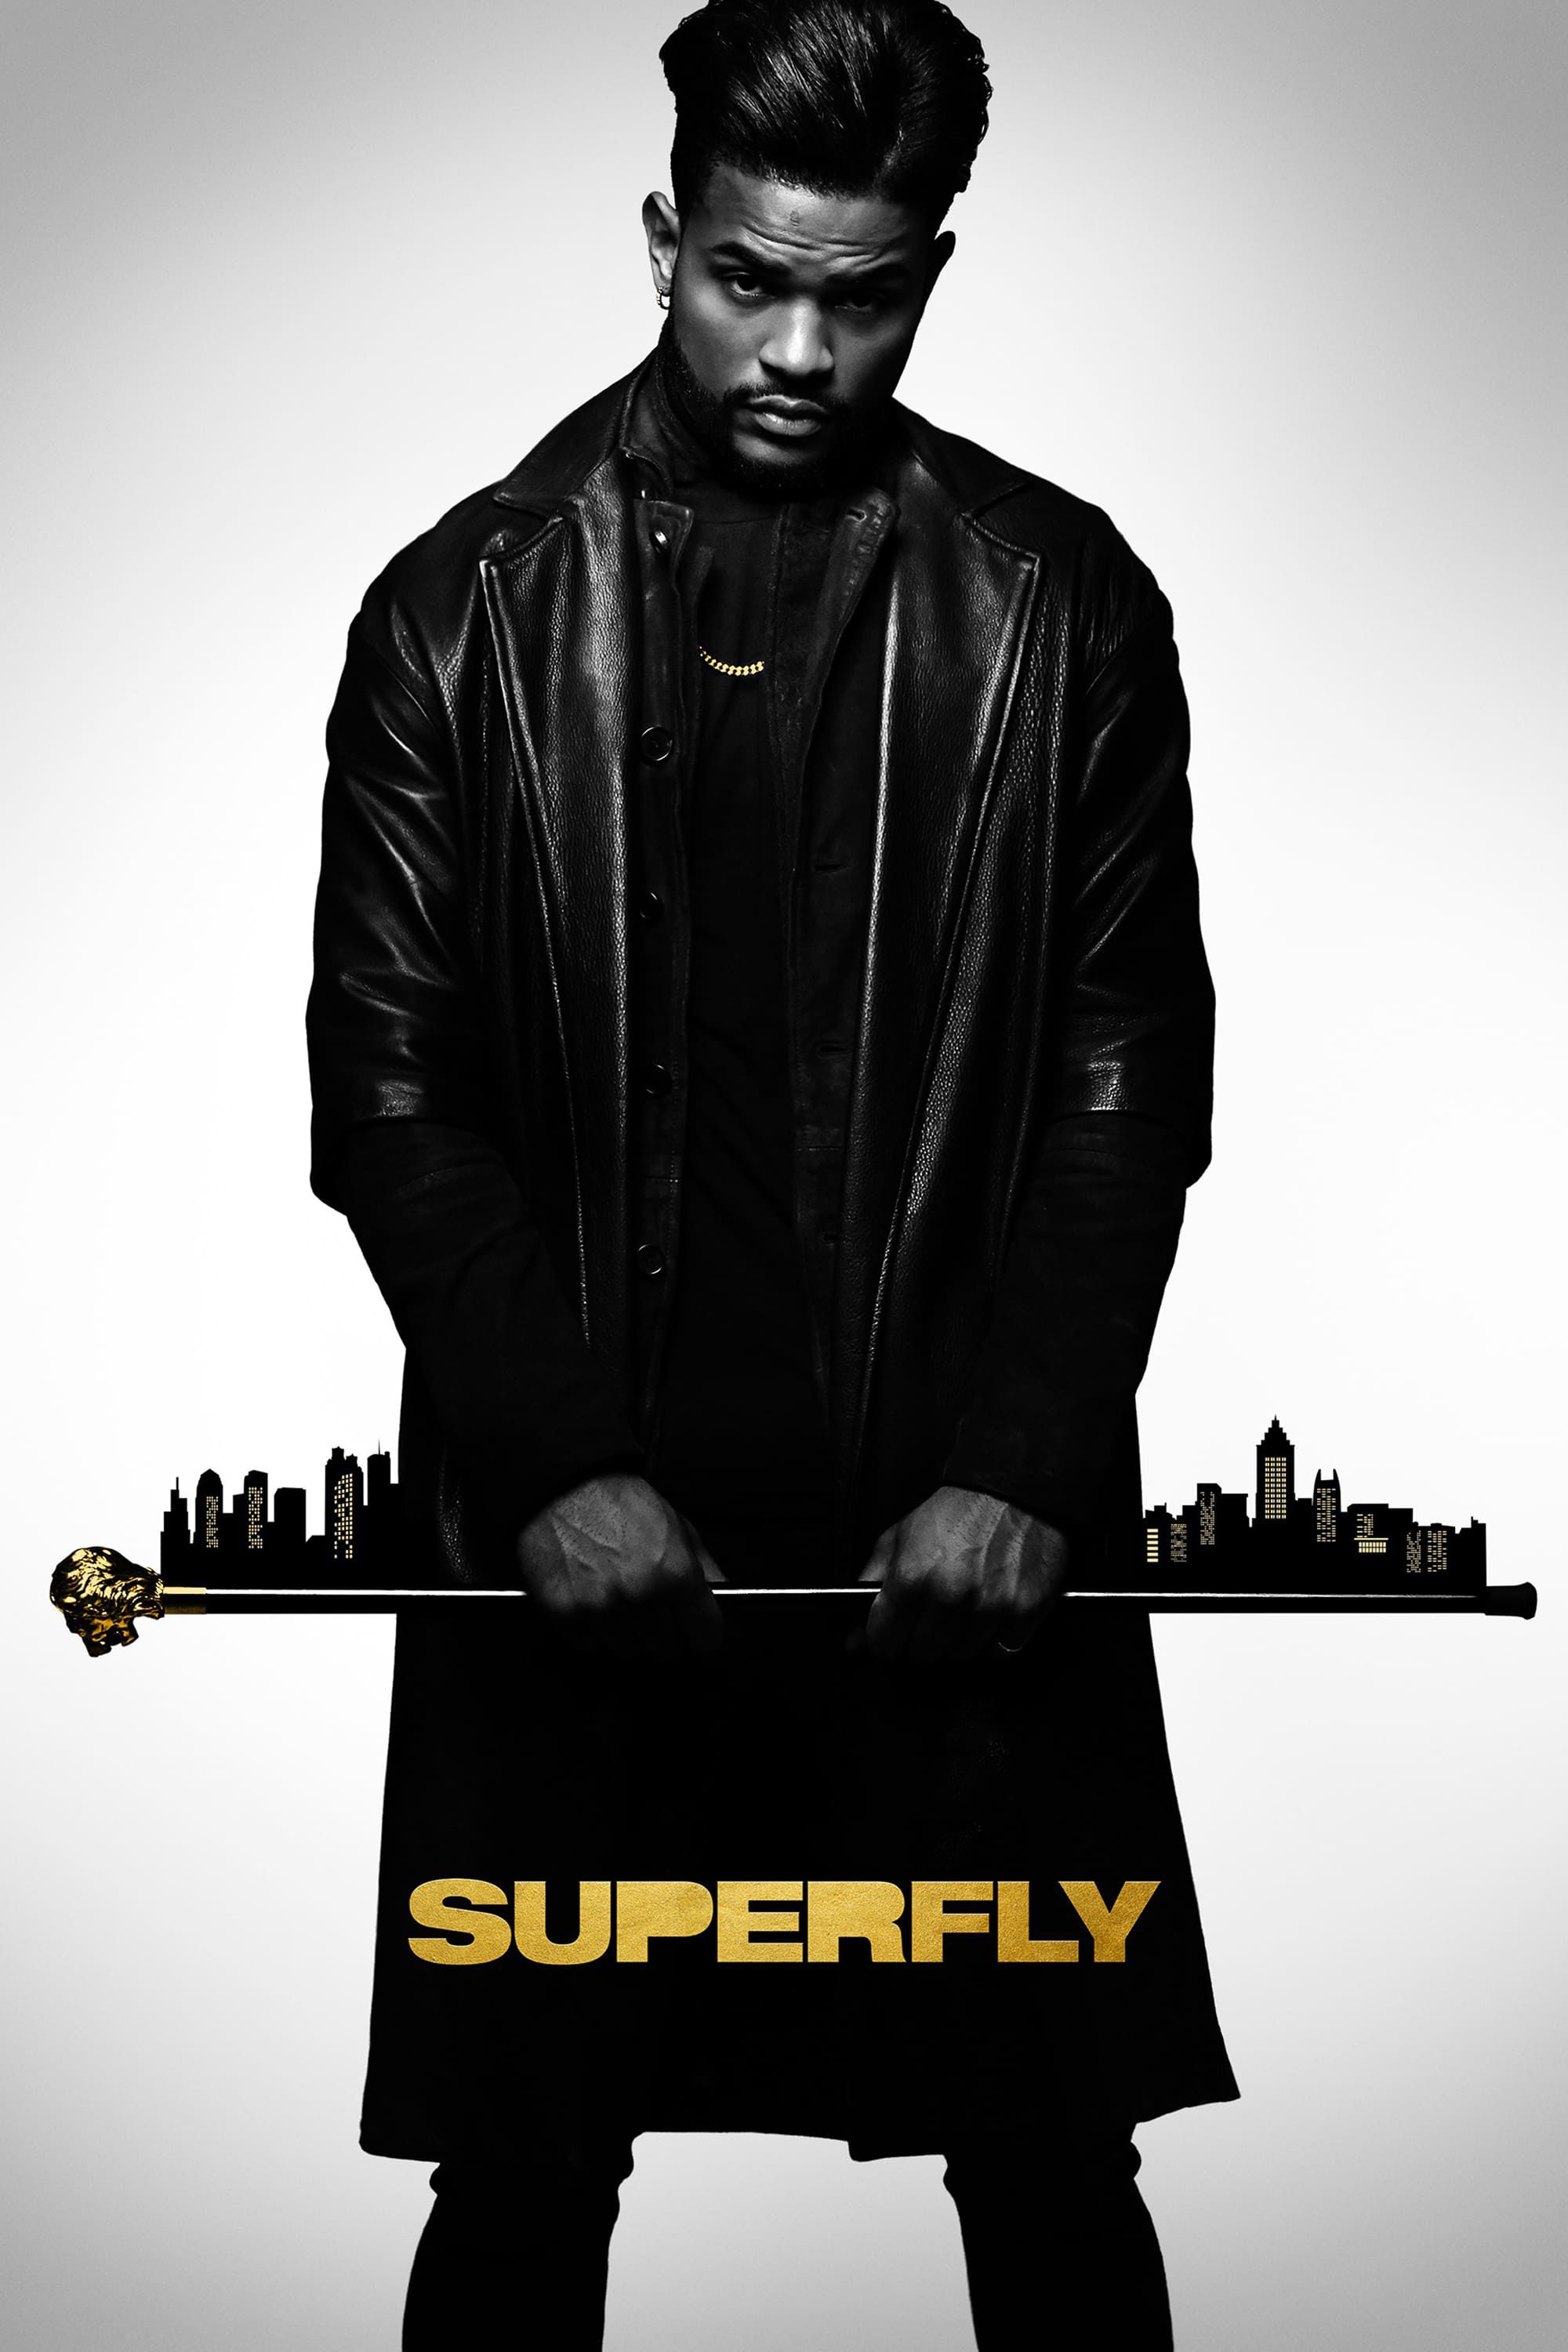 Superfly - Film (2018) streaming VF gratuit complet